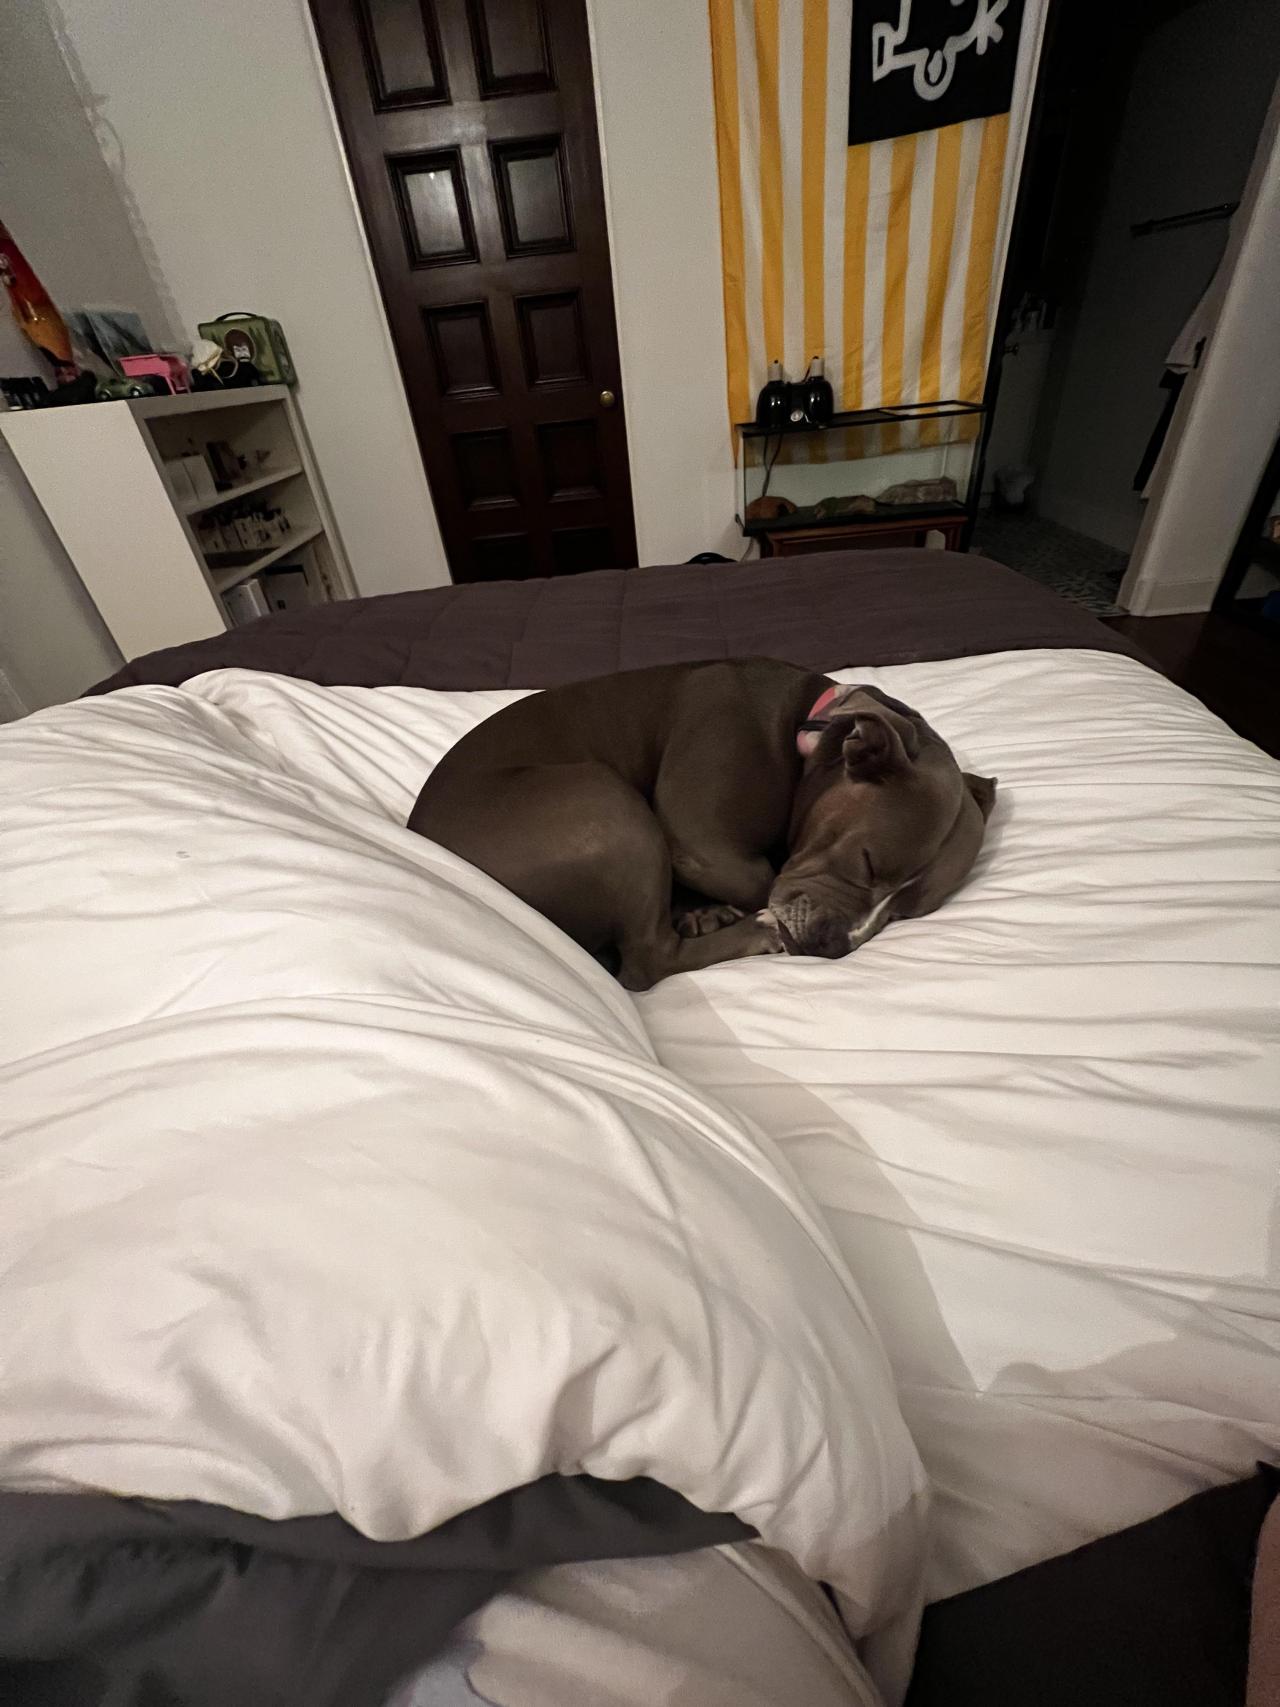 Sorry dad. No place for your legs. #pitbull#aww#cets#pupperss